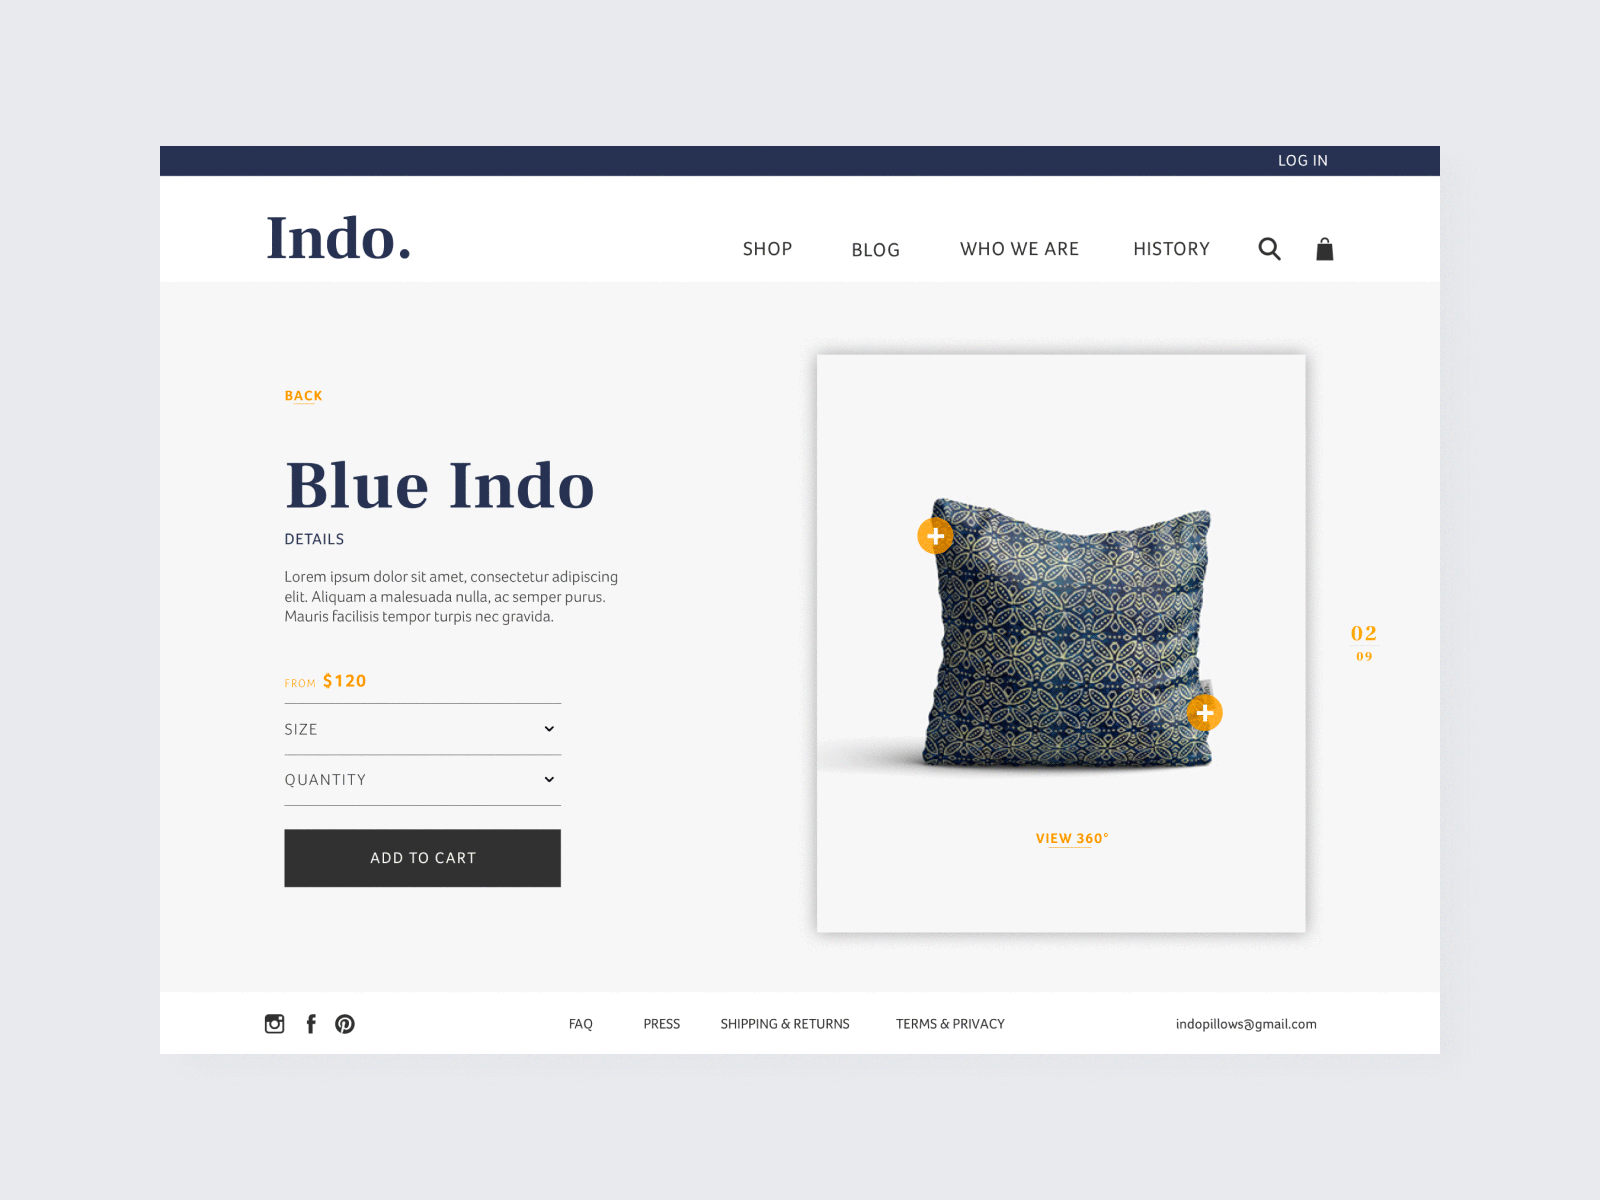 Indo - Product page